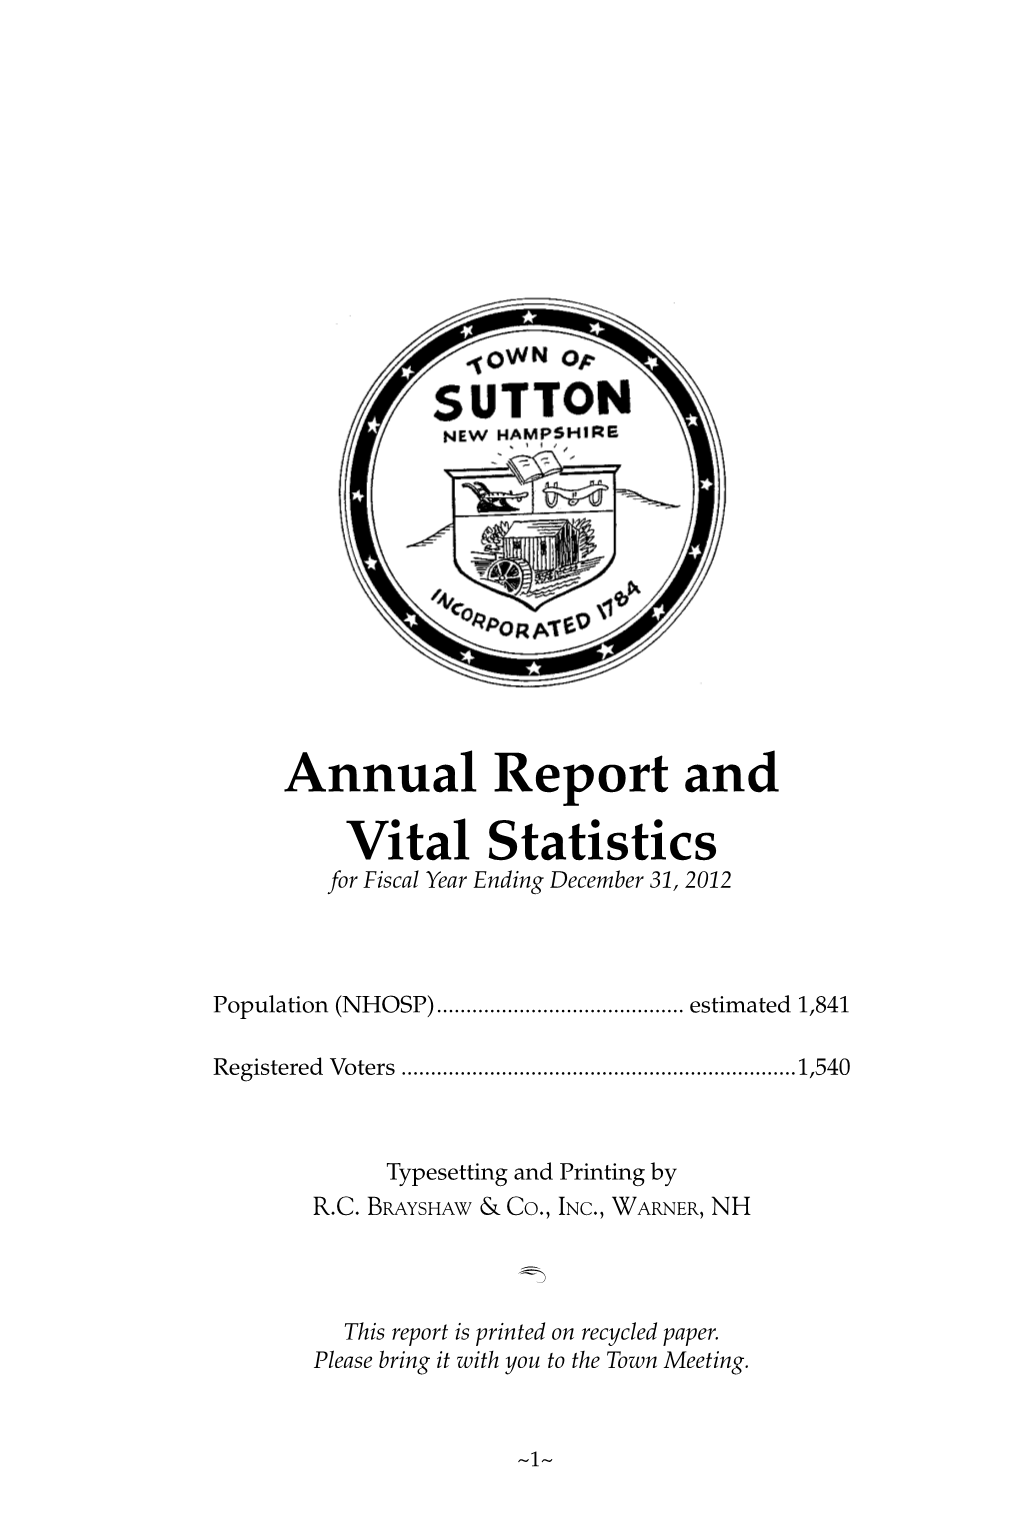 Annual Report and Vital Statistics for Fiscal Year Ending December 31, 2012